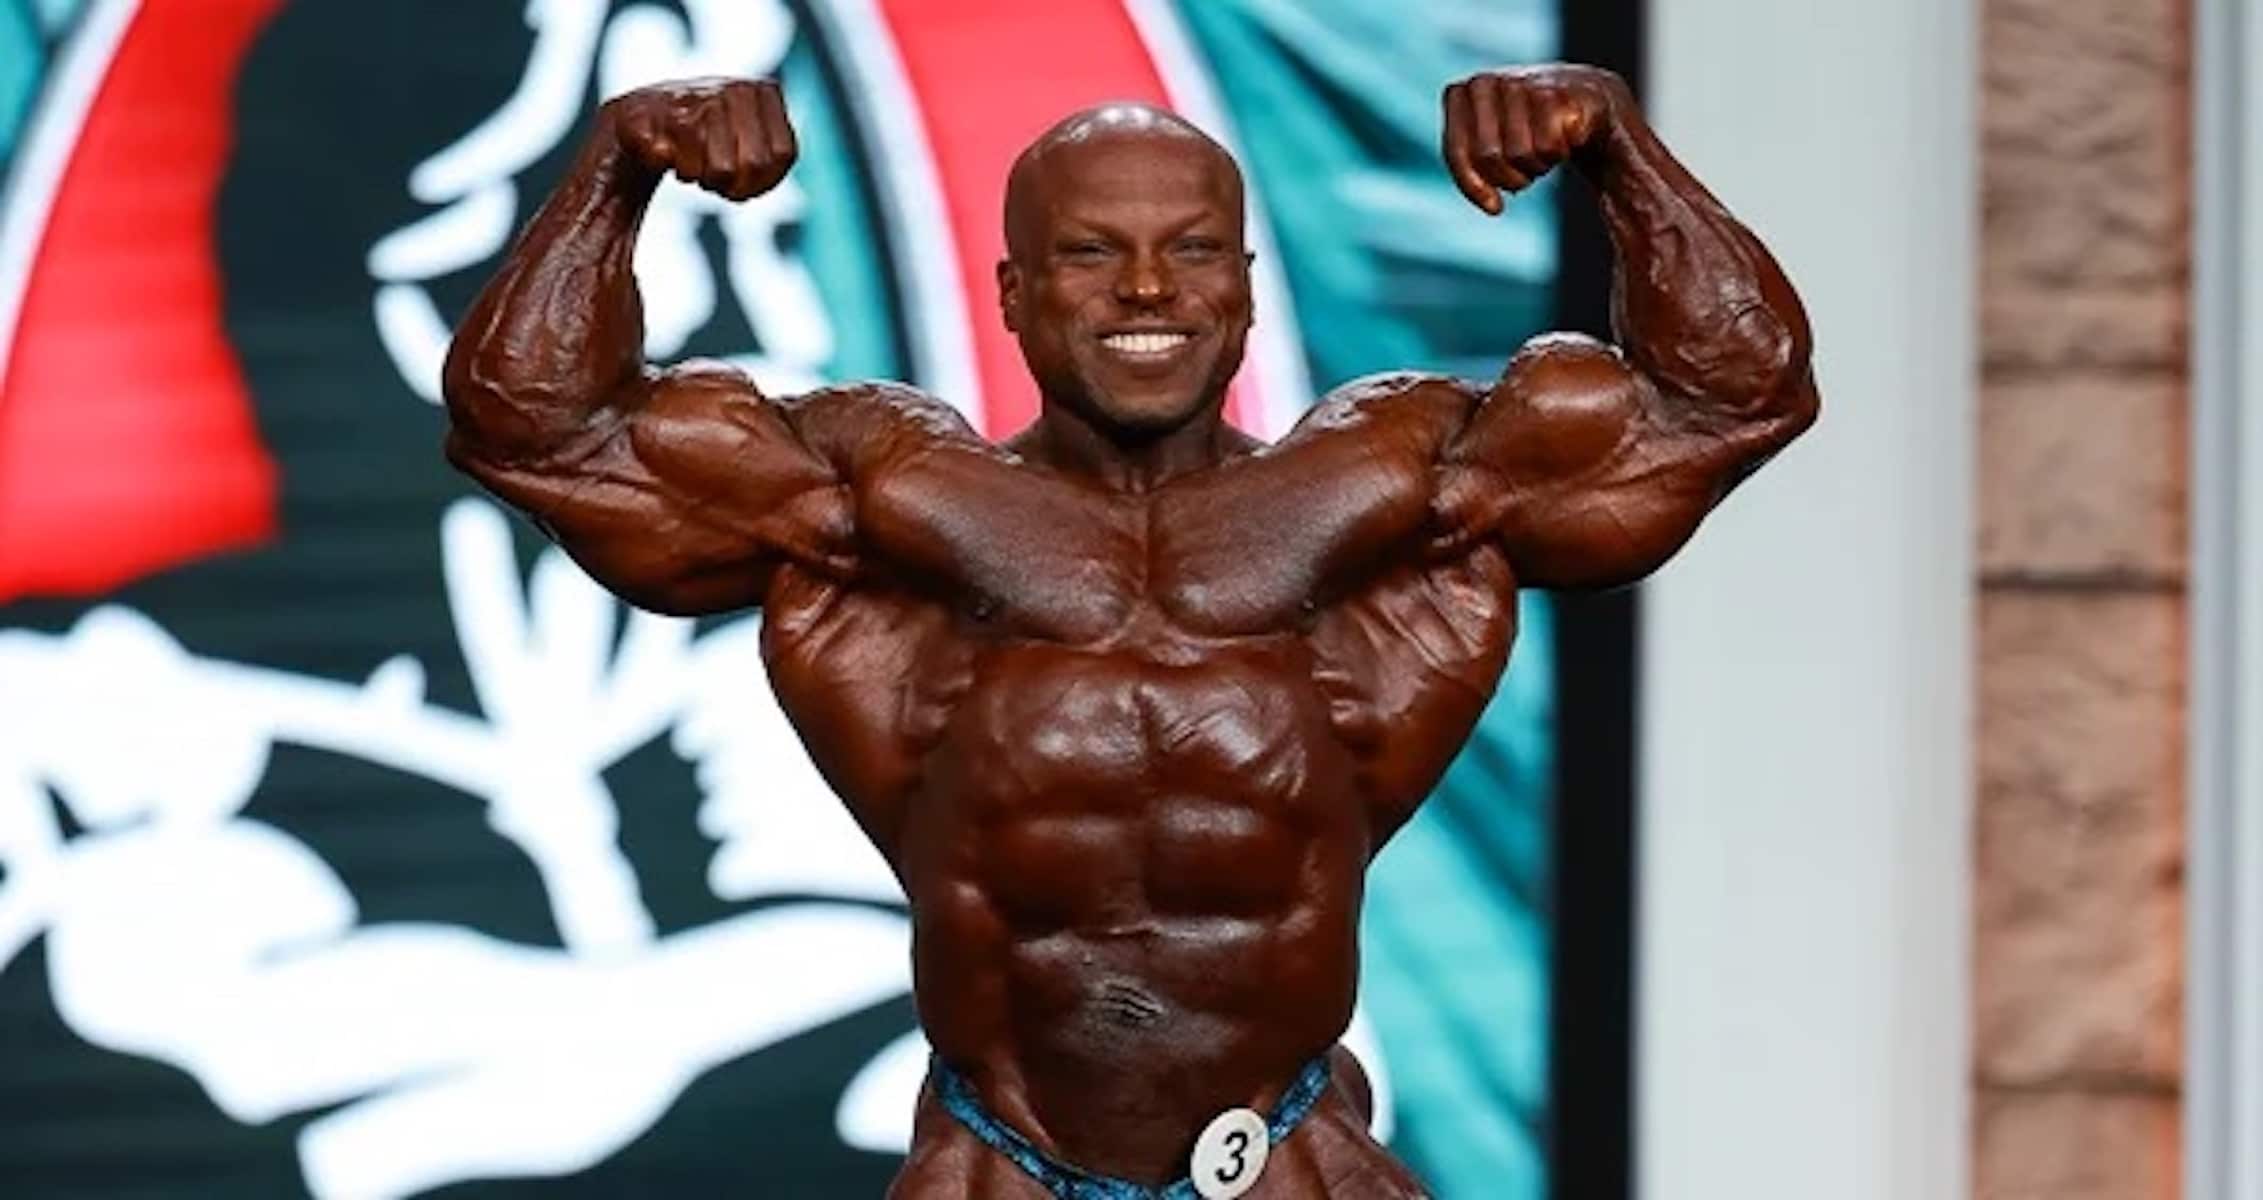 Former 212 Olympia Champ Shaun Clarida To Compete In Men’s Open This Month